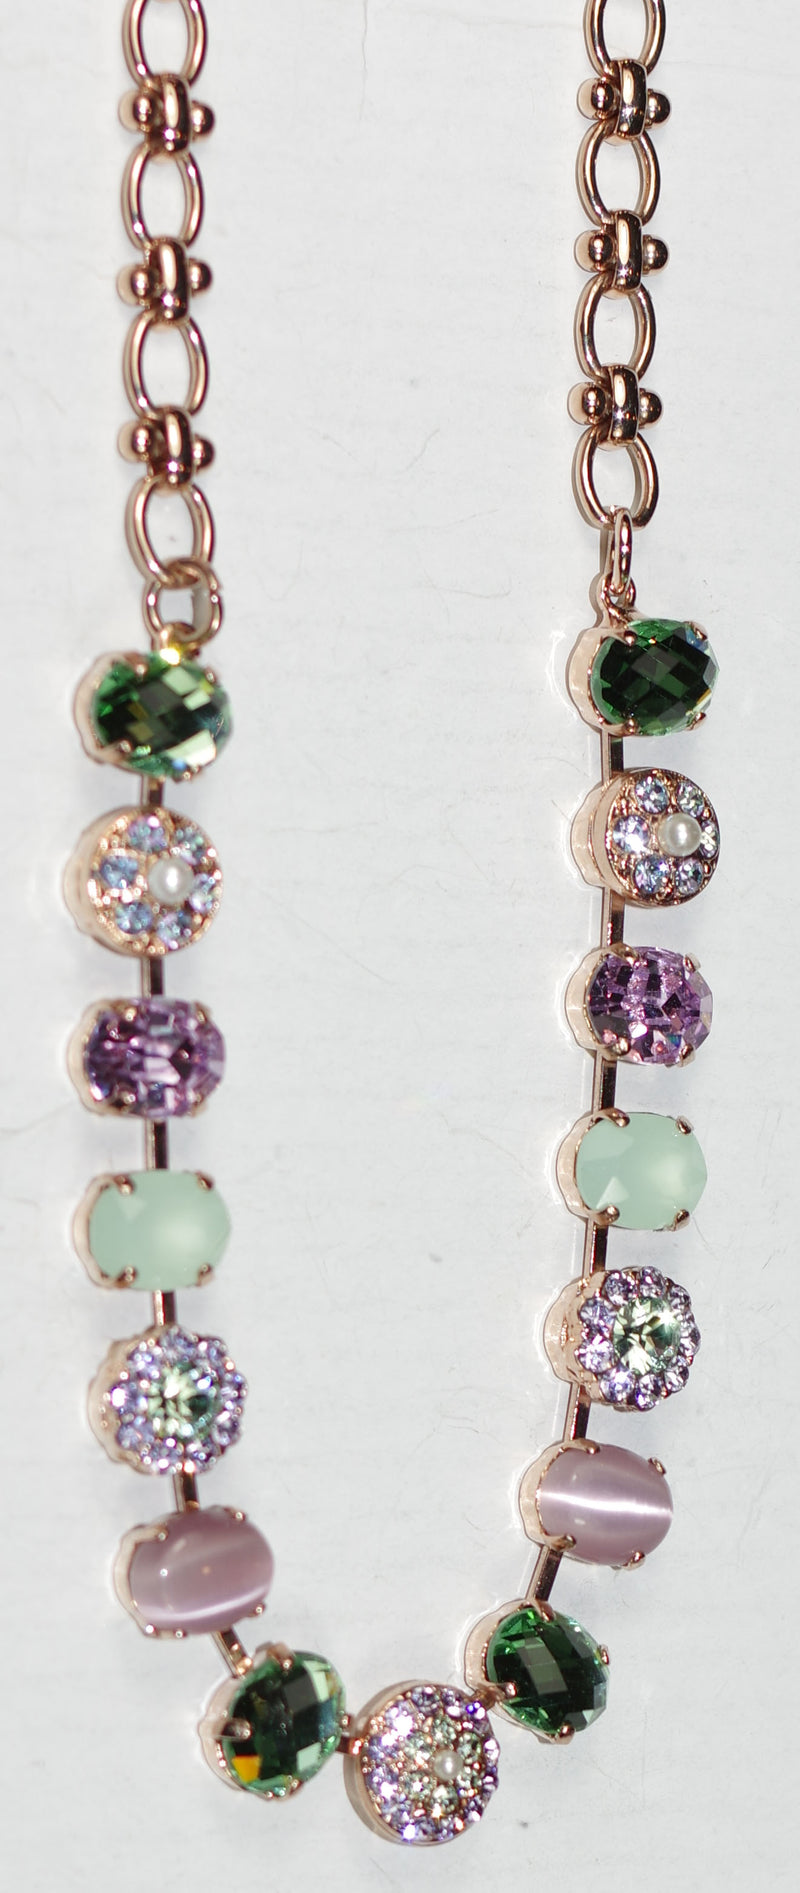 MARIANA NECKLACE MINT CHIP: green, lavender, pearl stones in rose gold setting, 19" adjustable chain